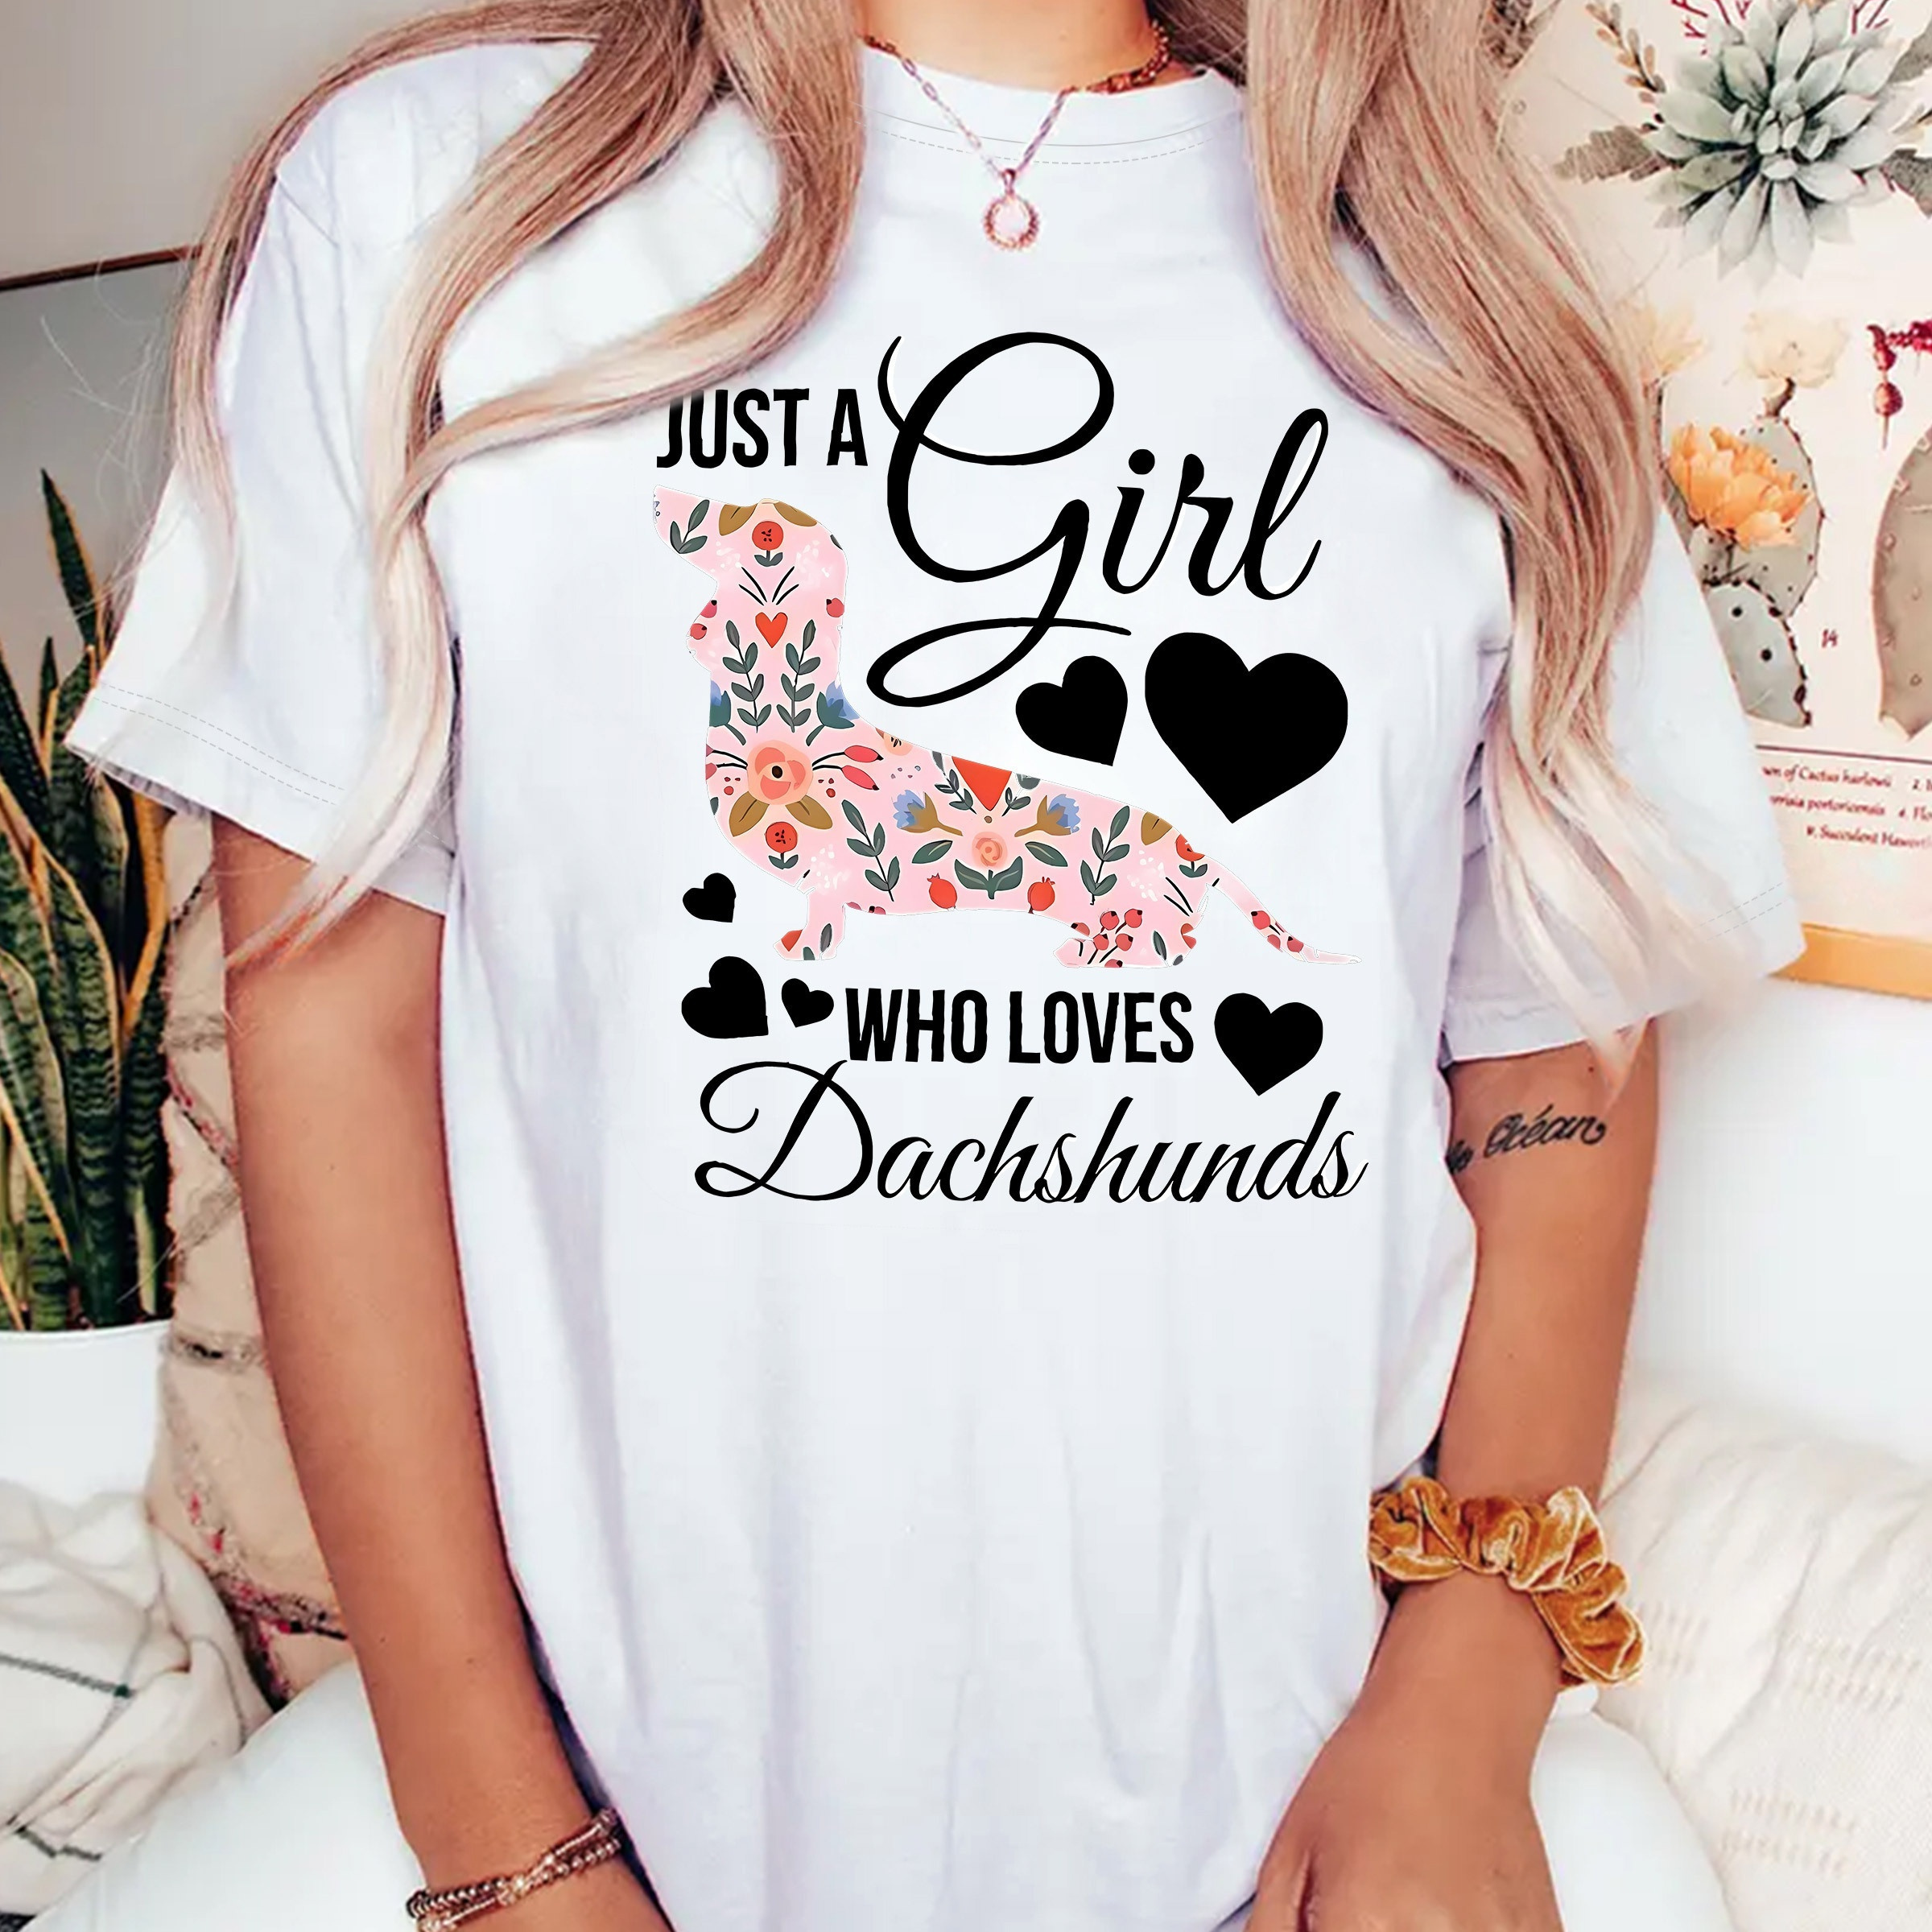 

Women's Plus Size Sporty T-shirt, Casual Style, "just A Girl Who Loves Dachshunds" Letter & Heart Dog Print, Vintage Fashion, Short Sleeve Top